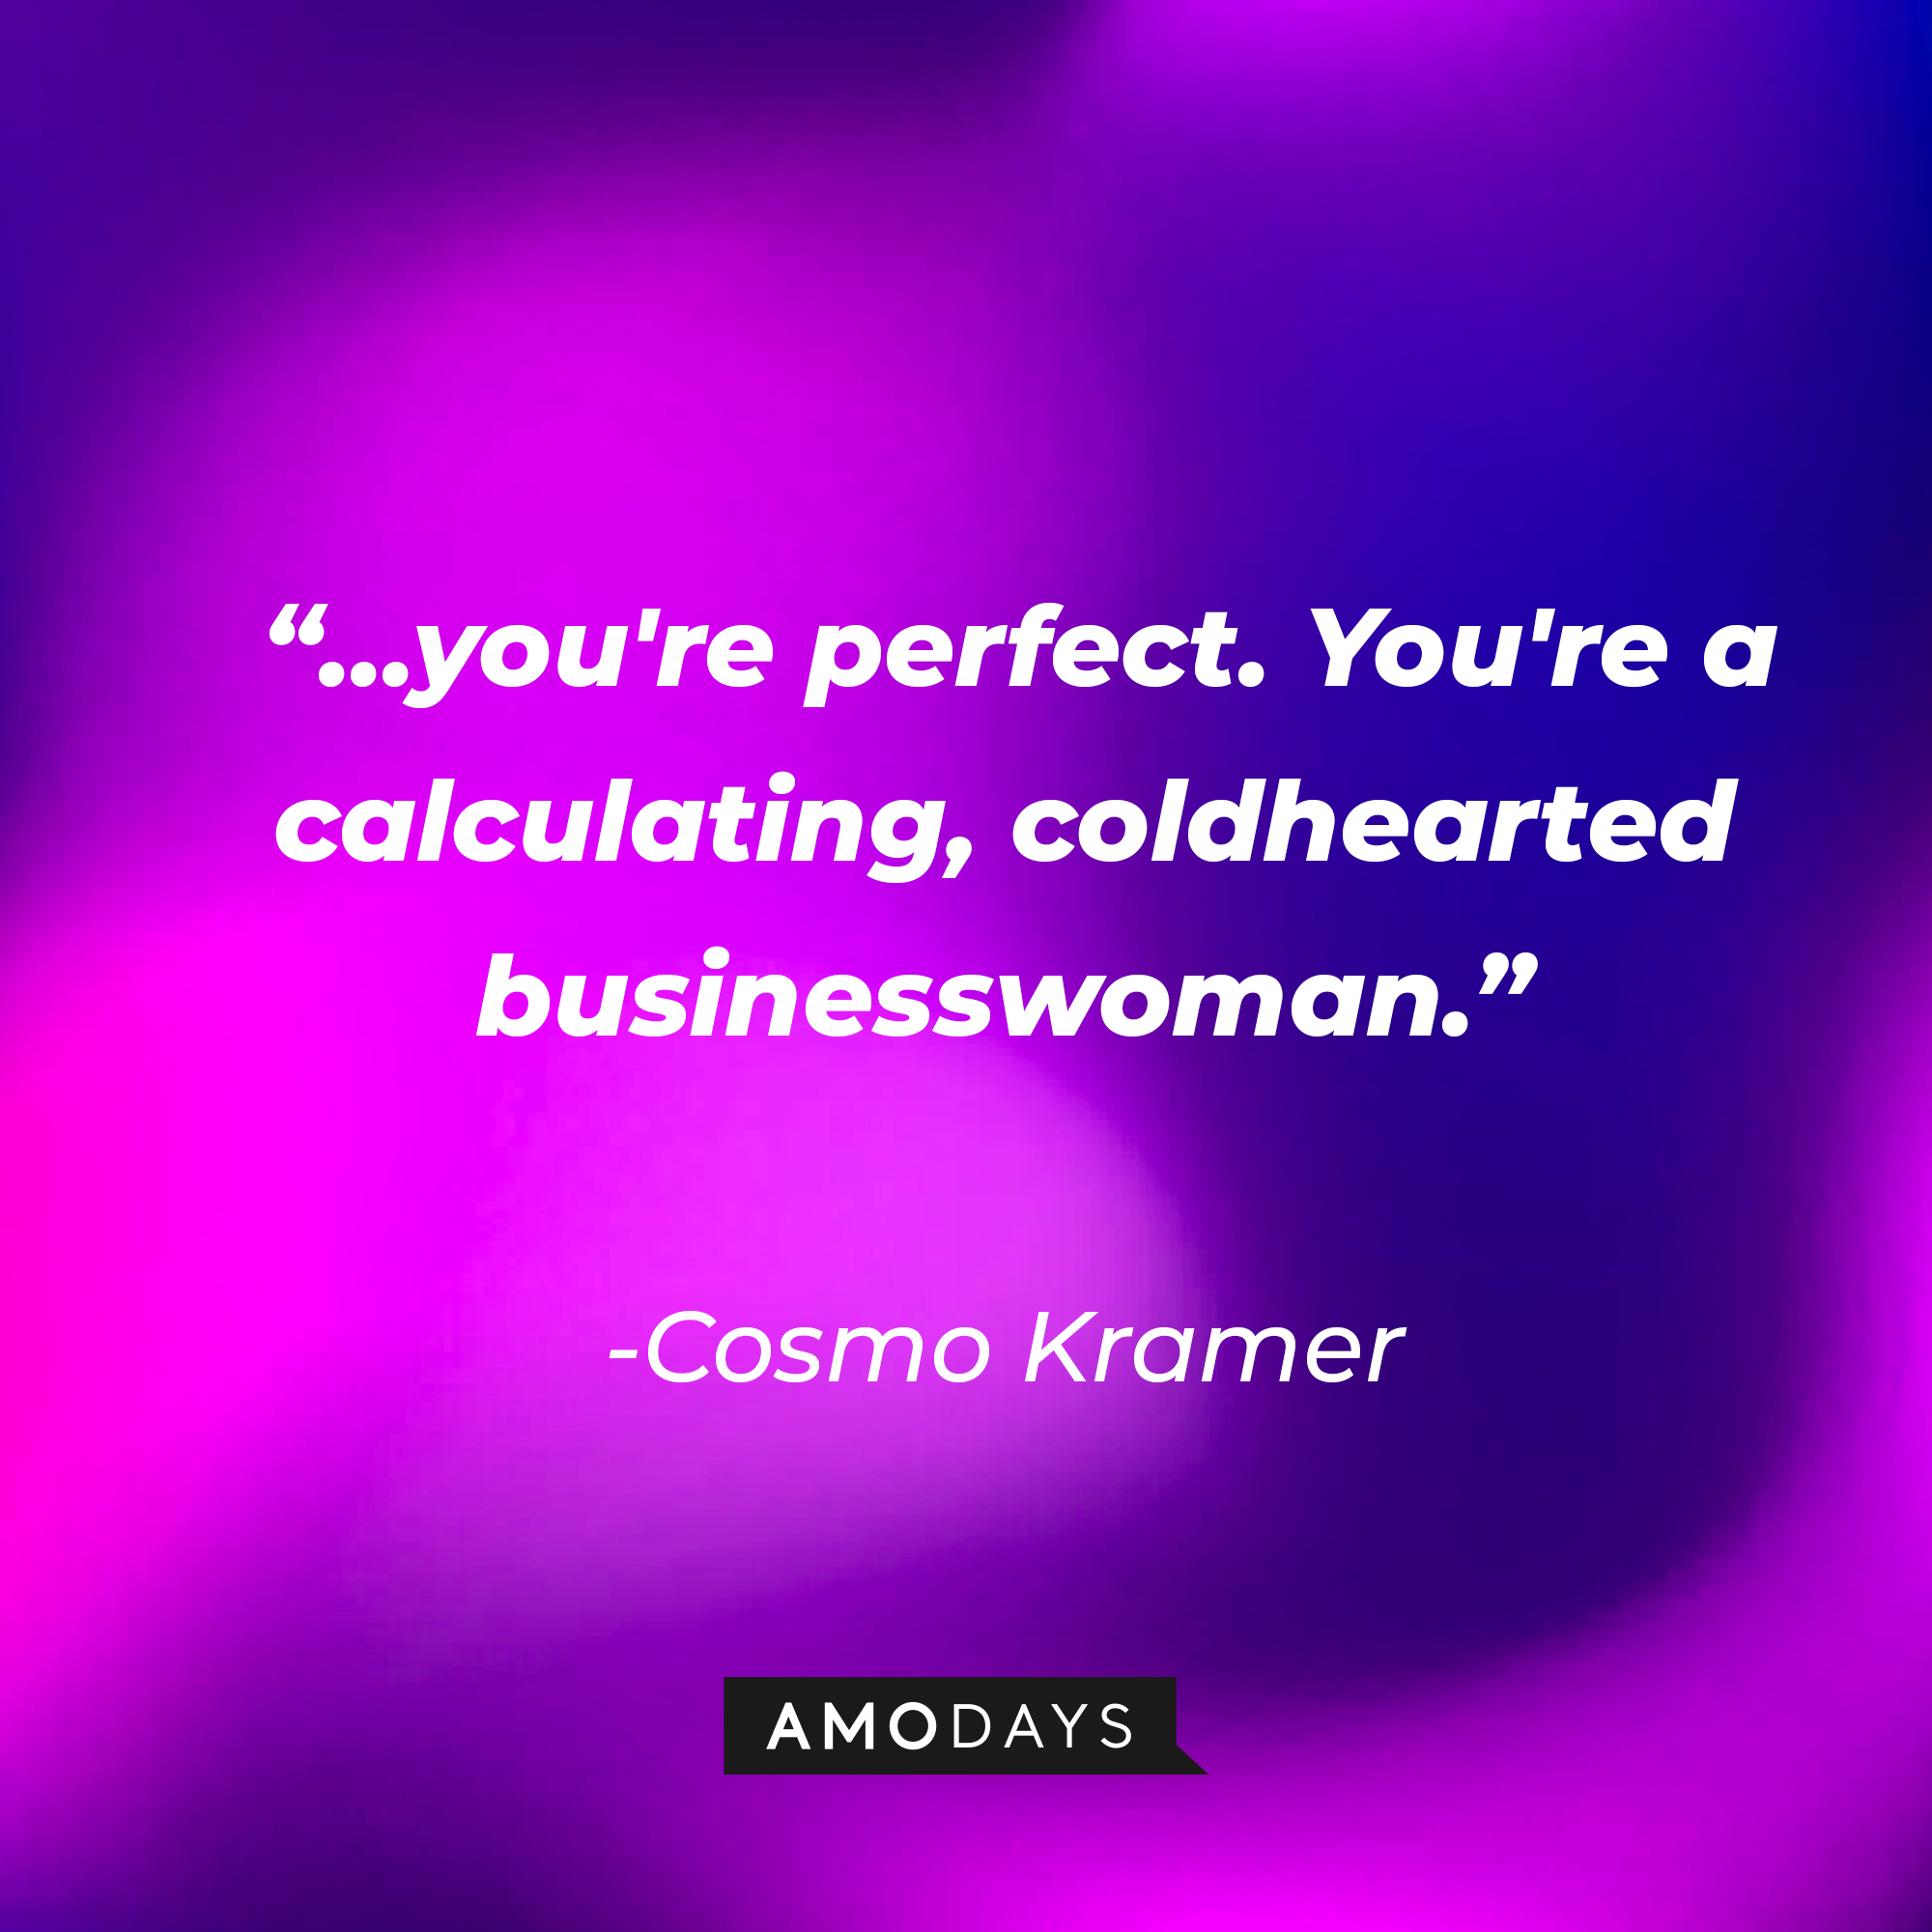 Cosmo Kramer’s quote:  “…you're perfect. You're a calculating, coldhearted businesswoman.” | Source: AmoDays